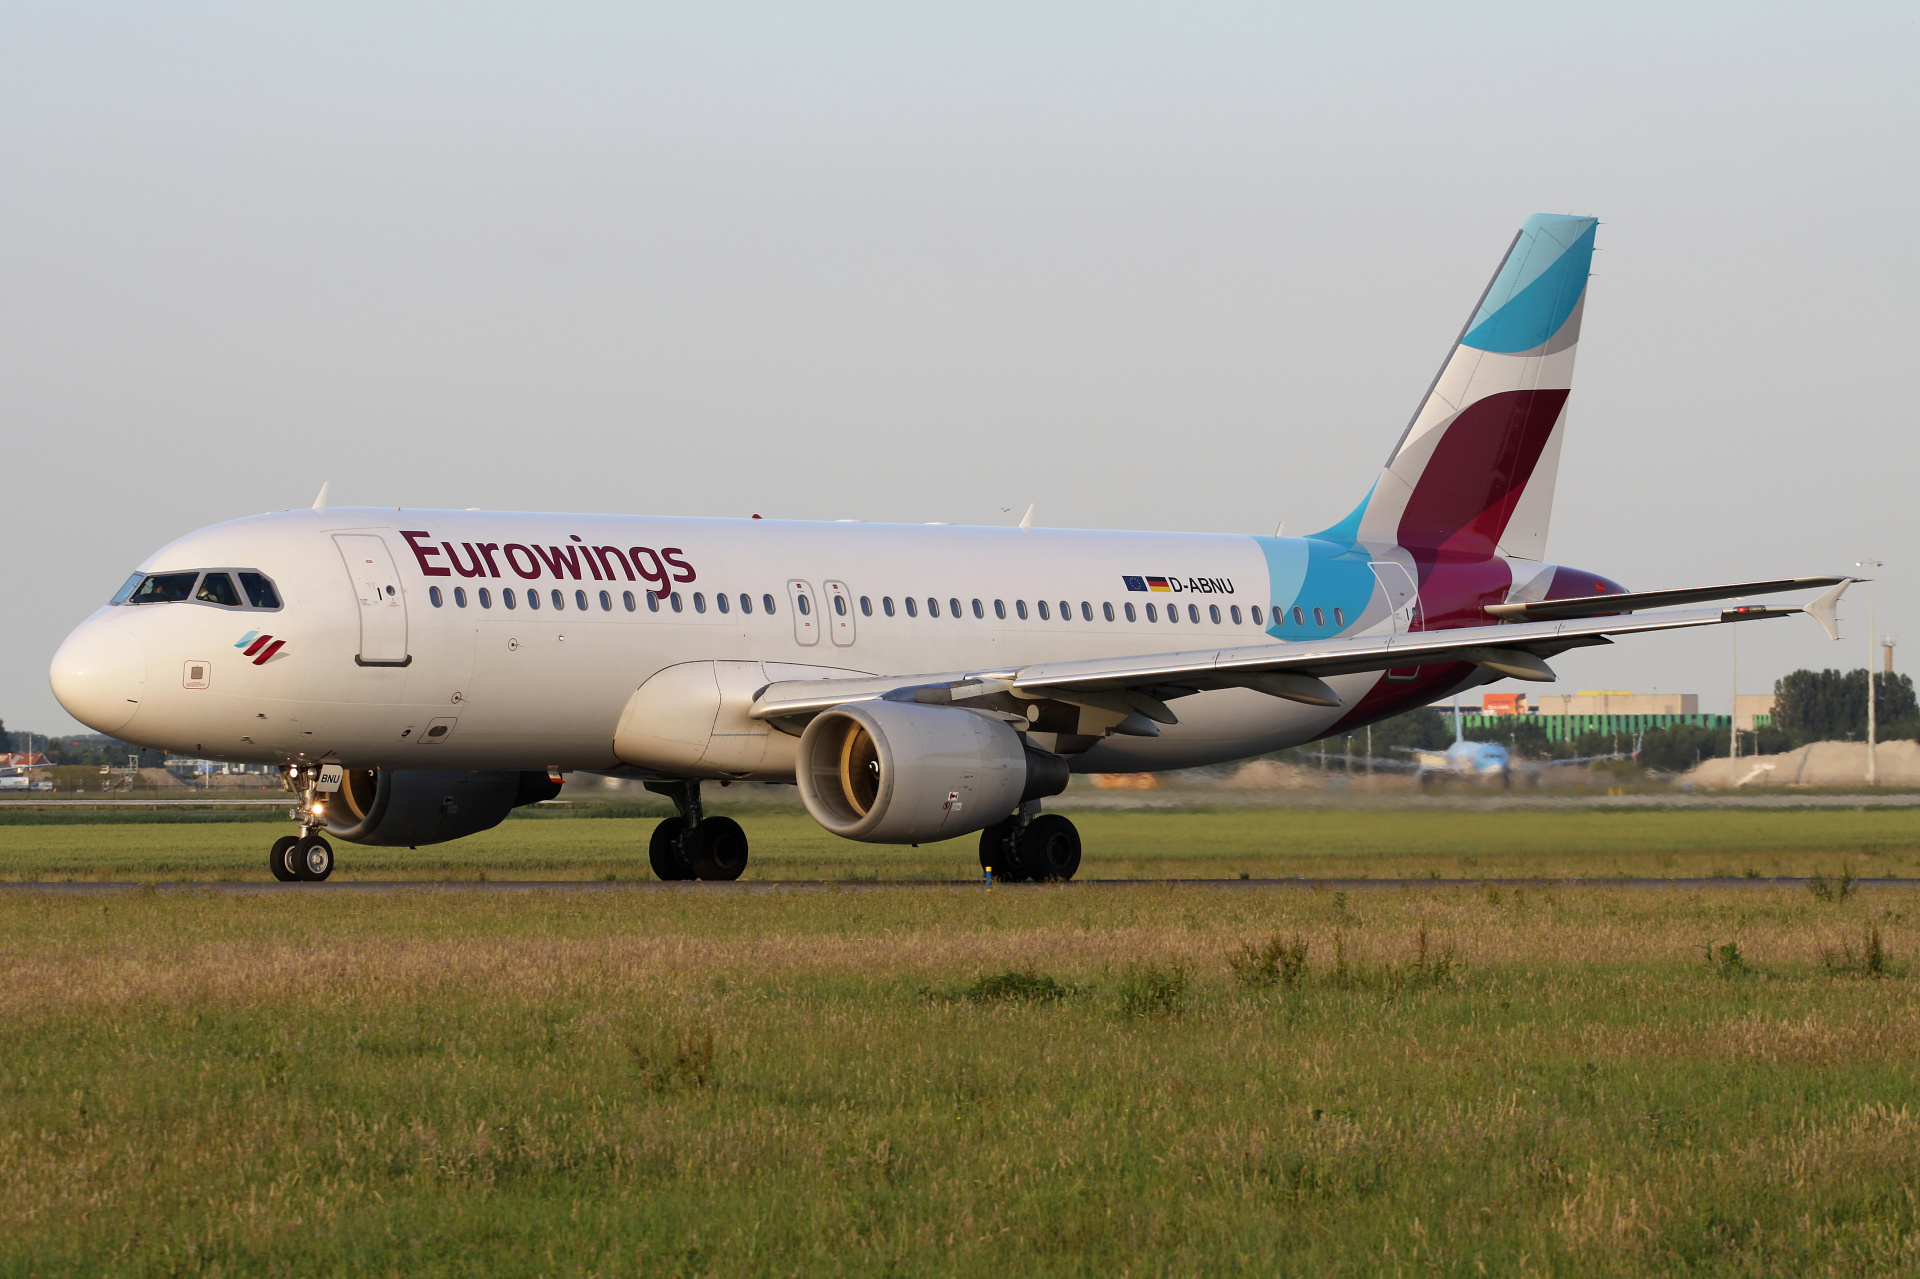 D-ABNU, Eurowings (Aircraft » Schiphol Spotting » Airbus A320-200)